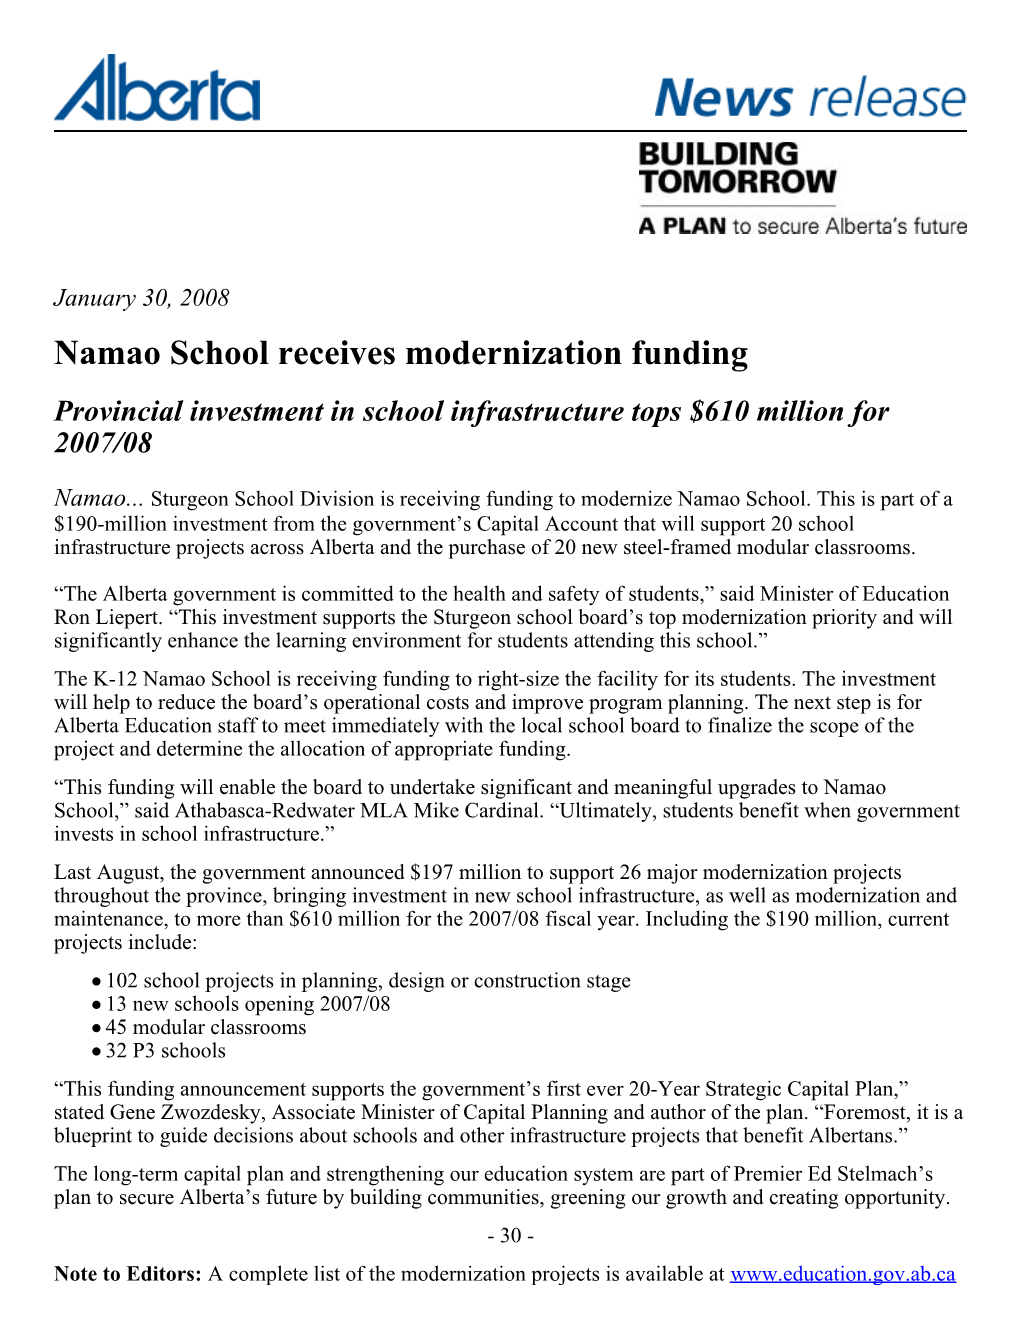 Namao School Receives Modernization Funding Provincial Investment in School Infrastructure Tops $610 Million for 2007/08